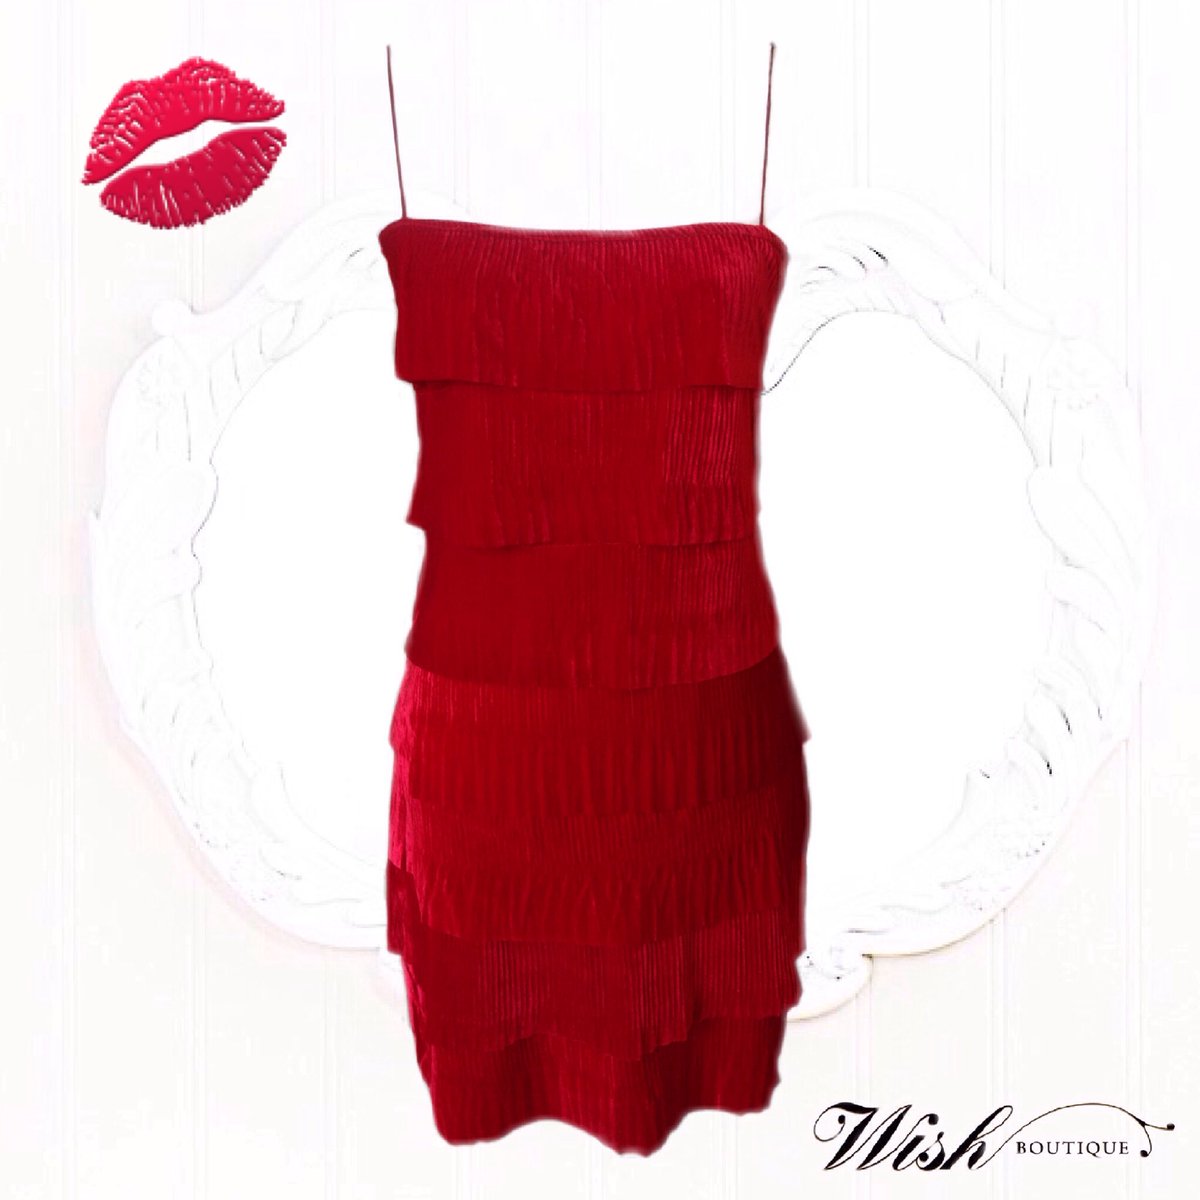 Be #Unforgettable in this #LittleRedDress ! What a perfect dress to #TurnHeads & to look & feel great! #DressUp this #ValentinesDay #HotDate #RedHotStyle - to be number one, shop at the #BestBoutique around! #WishBoutique #WishesComeTrue #Stunning #GetTheLook #ShopLocal #Burnley